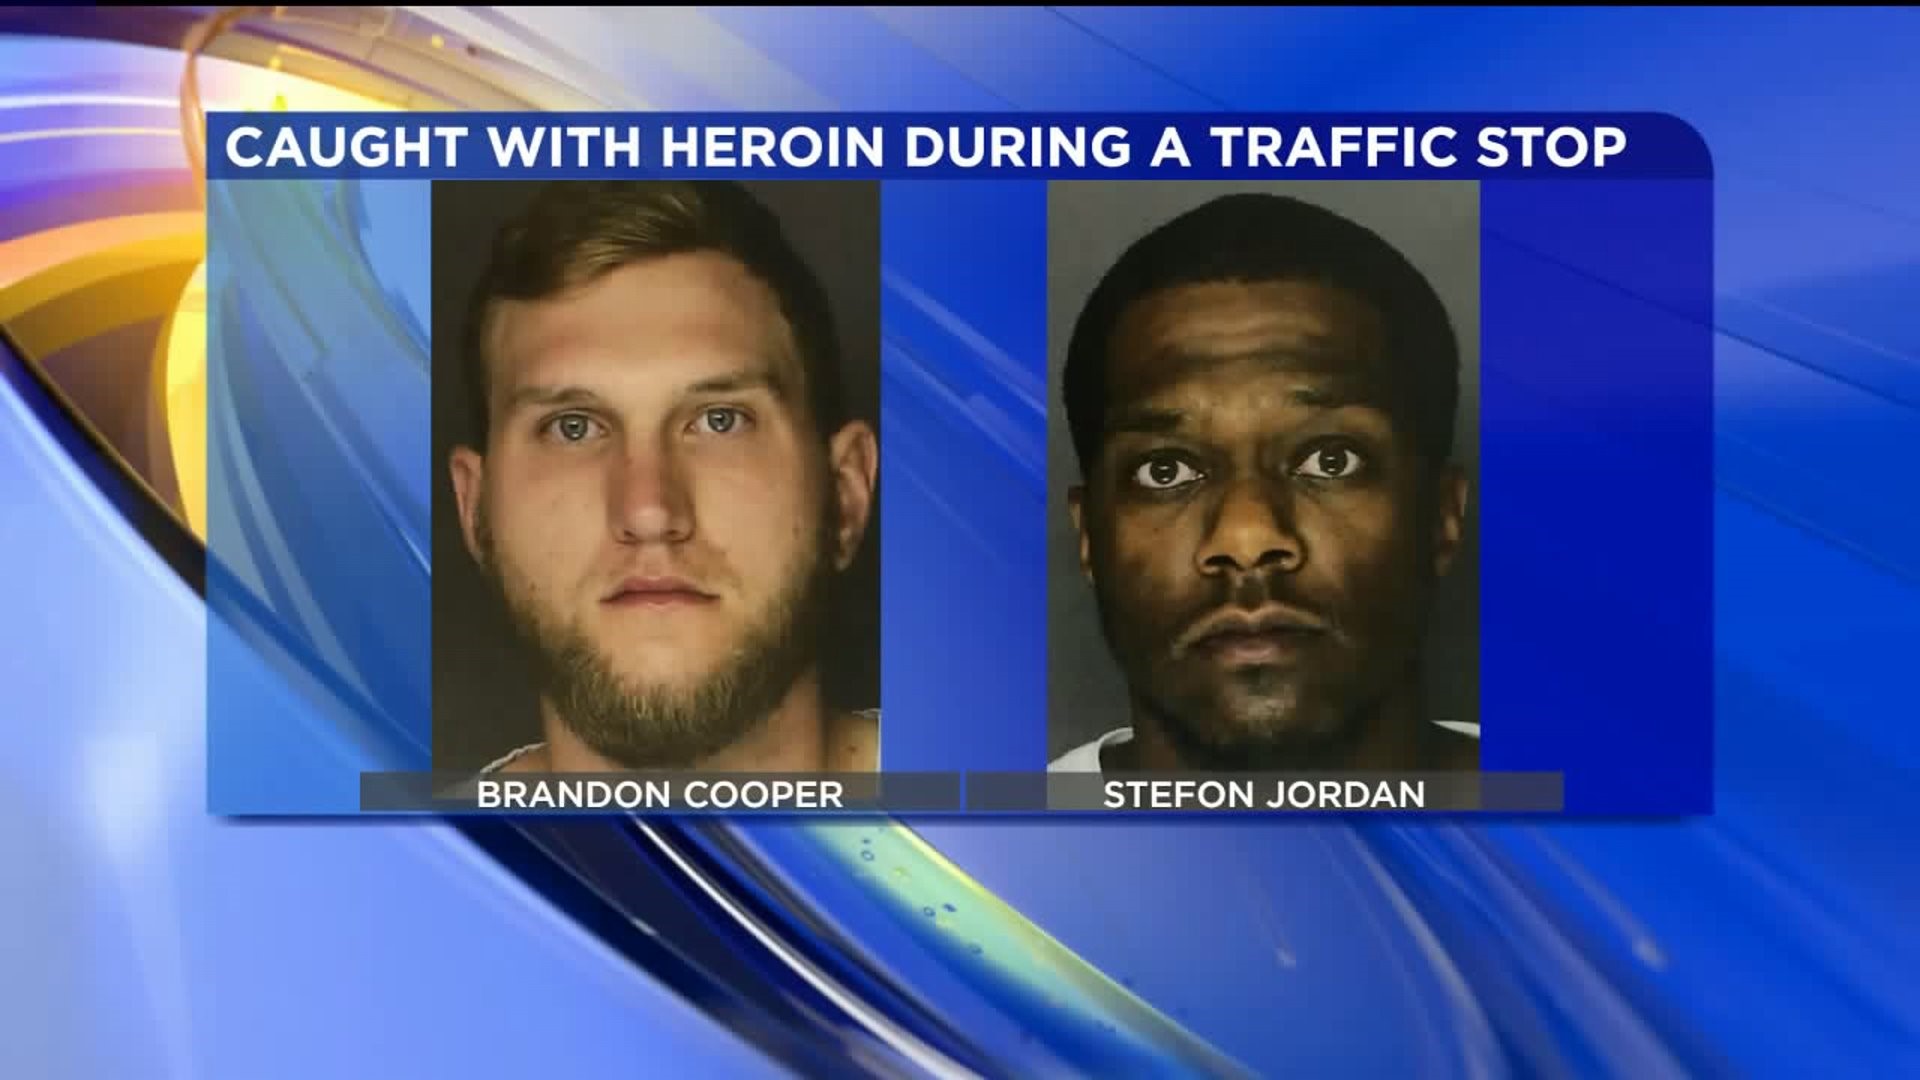 Thousands of Bags of Heroin Seized in Traffic Stop